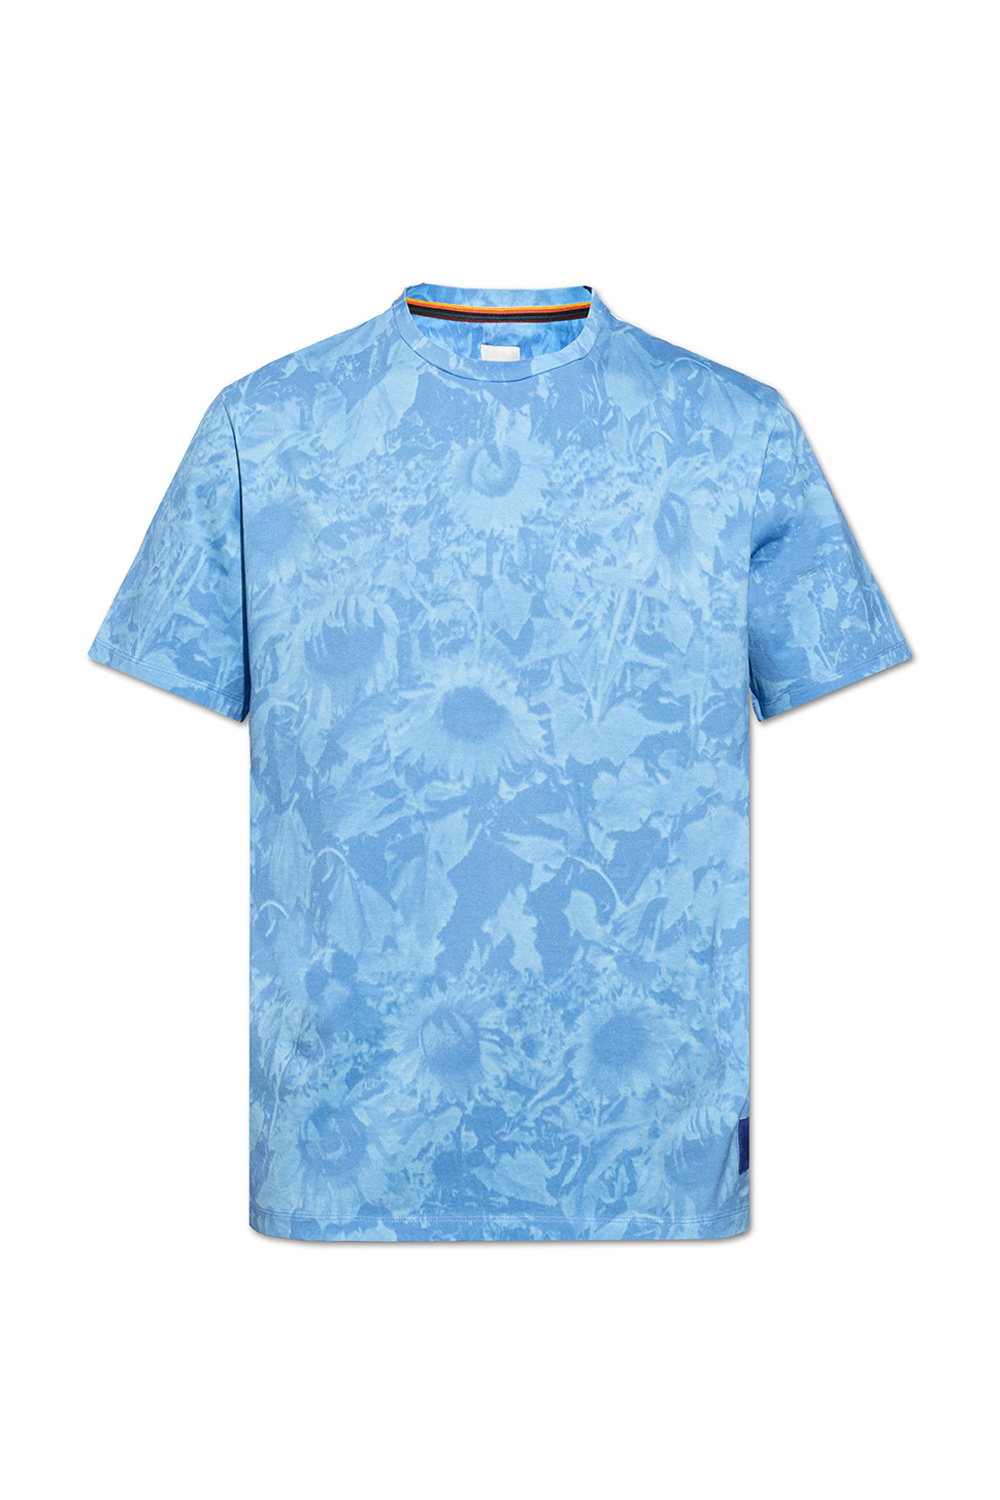 Paul Smith Patterned T-shir